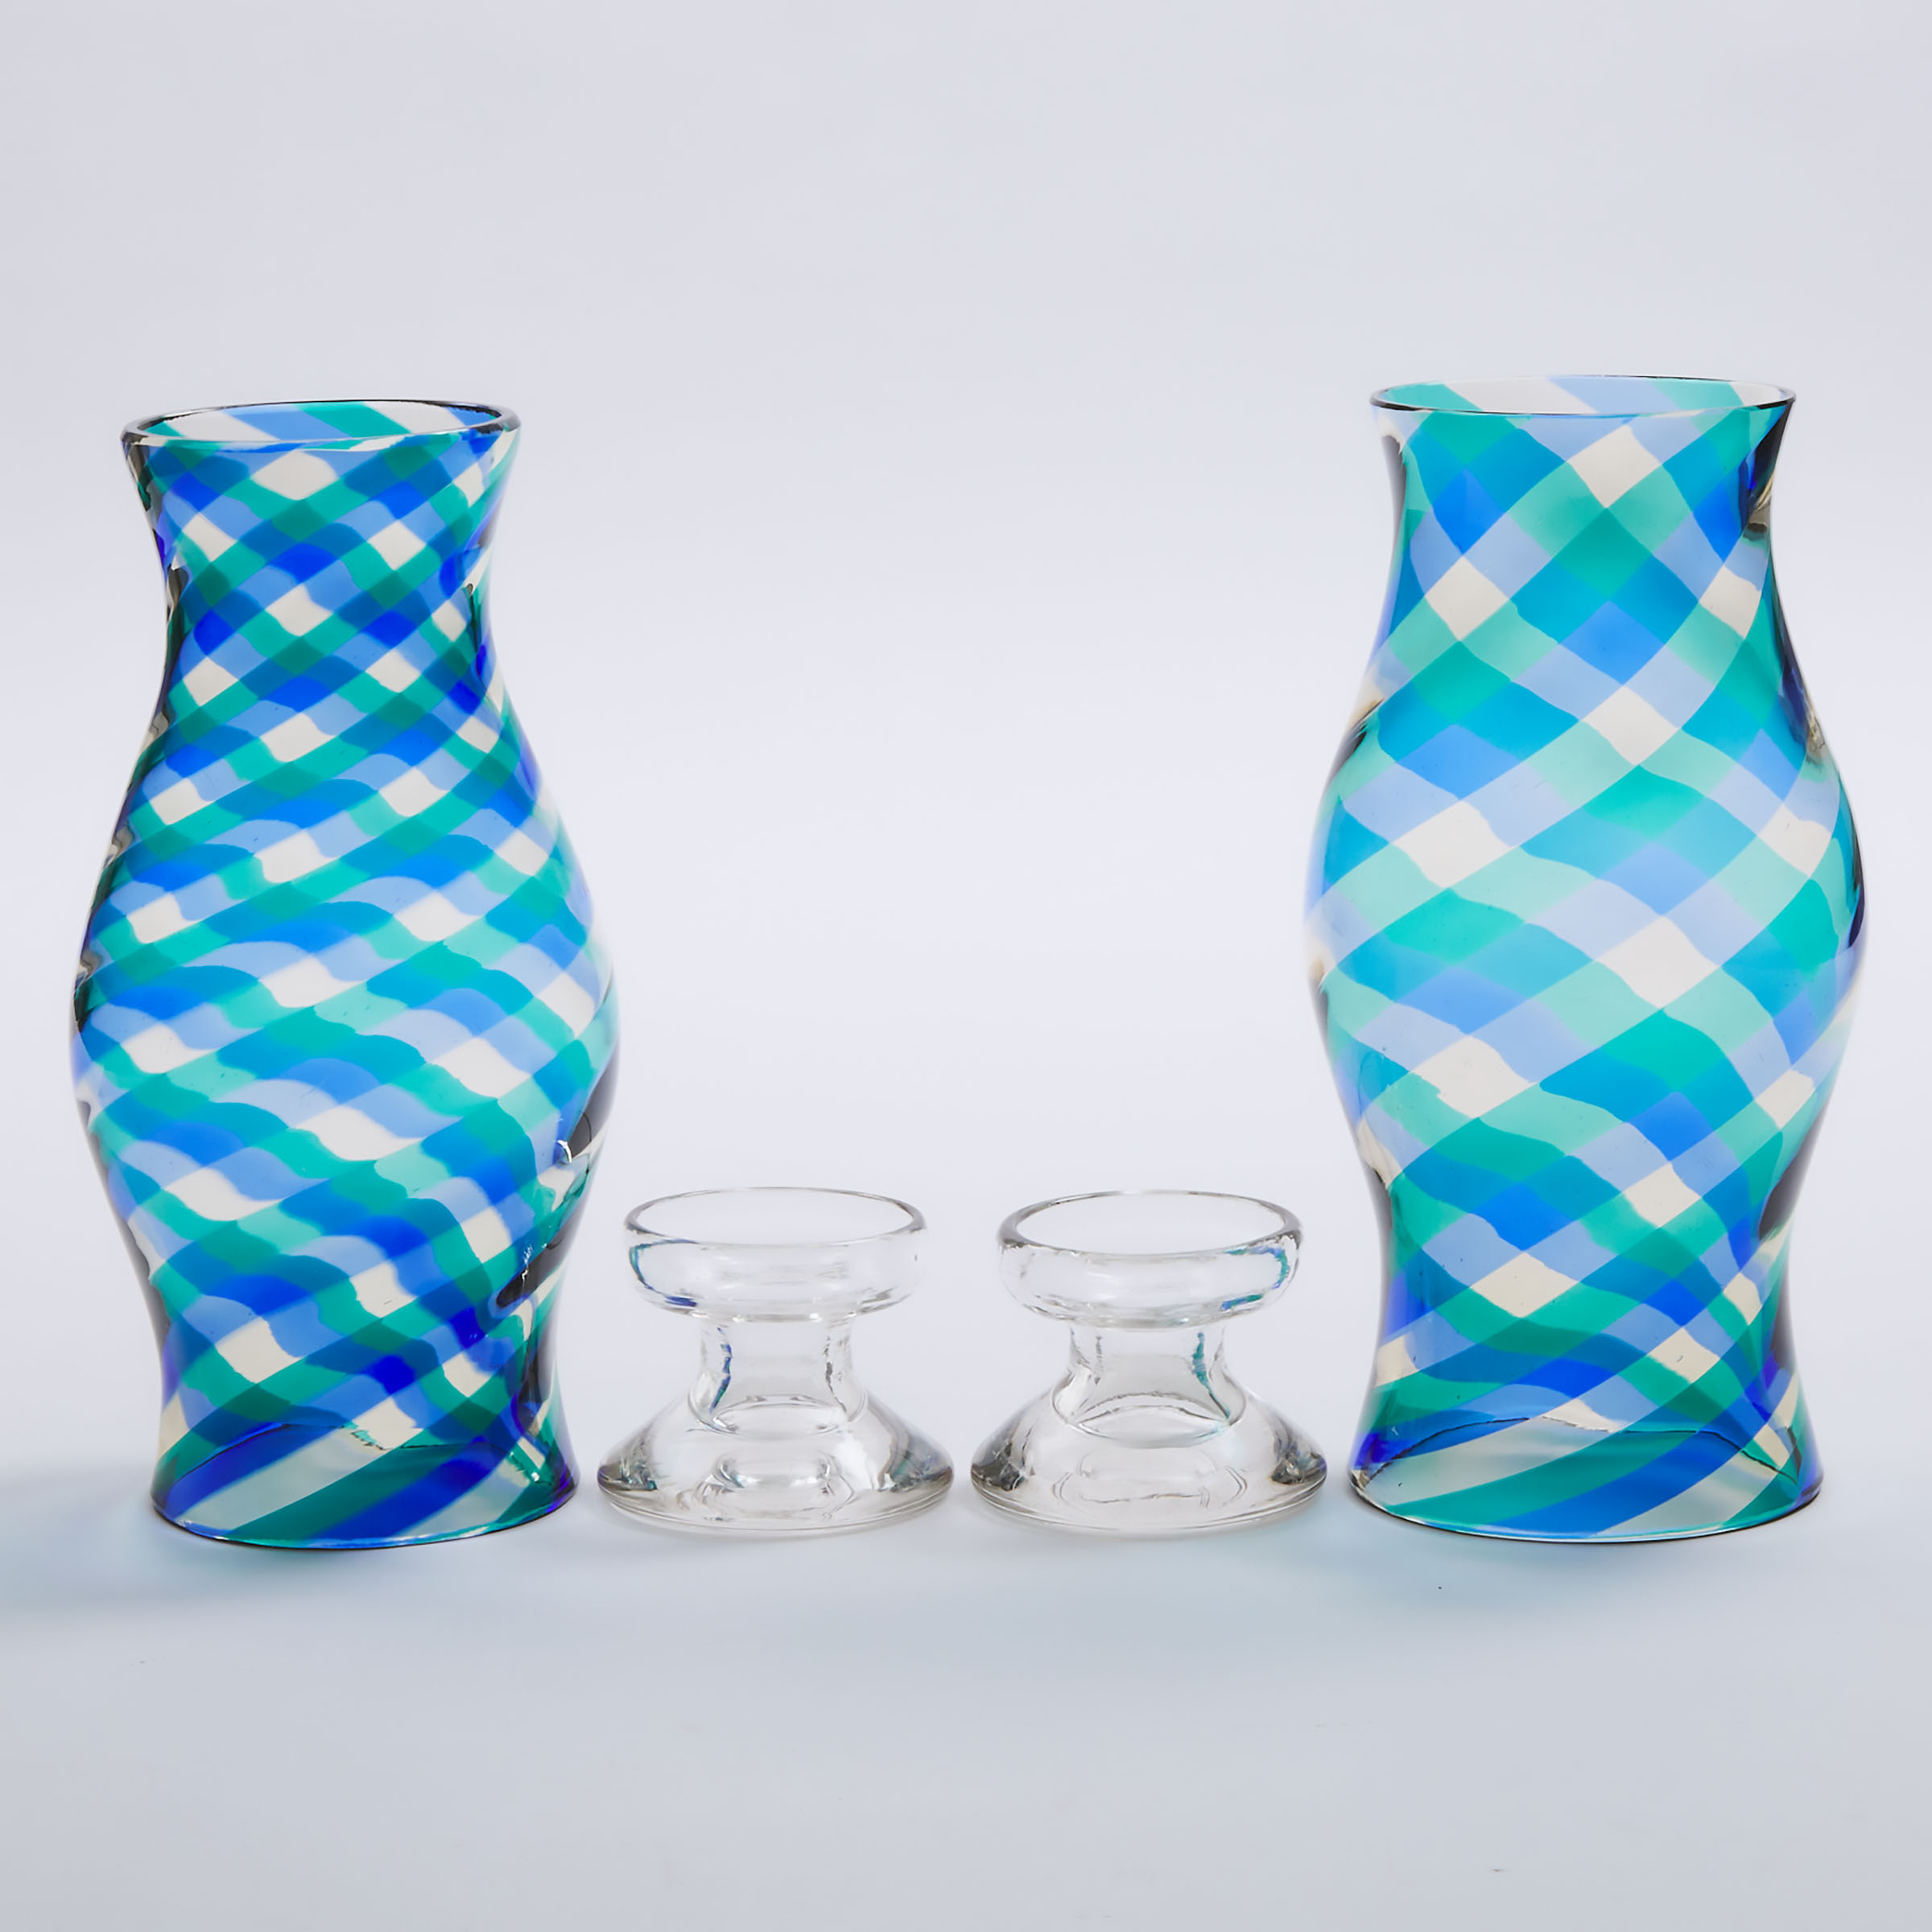 Pair of Venini Glass Low Candlesticks with Blue and Green Striped Hurricane Shades, mid-20th century